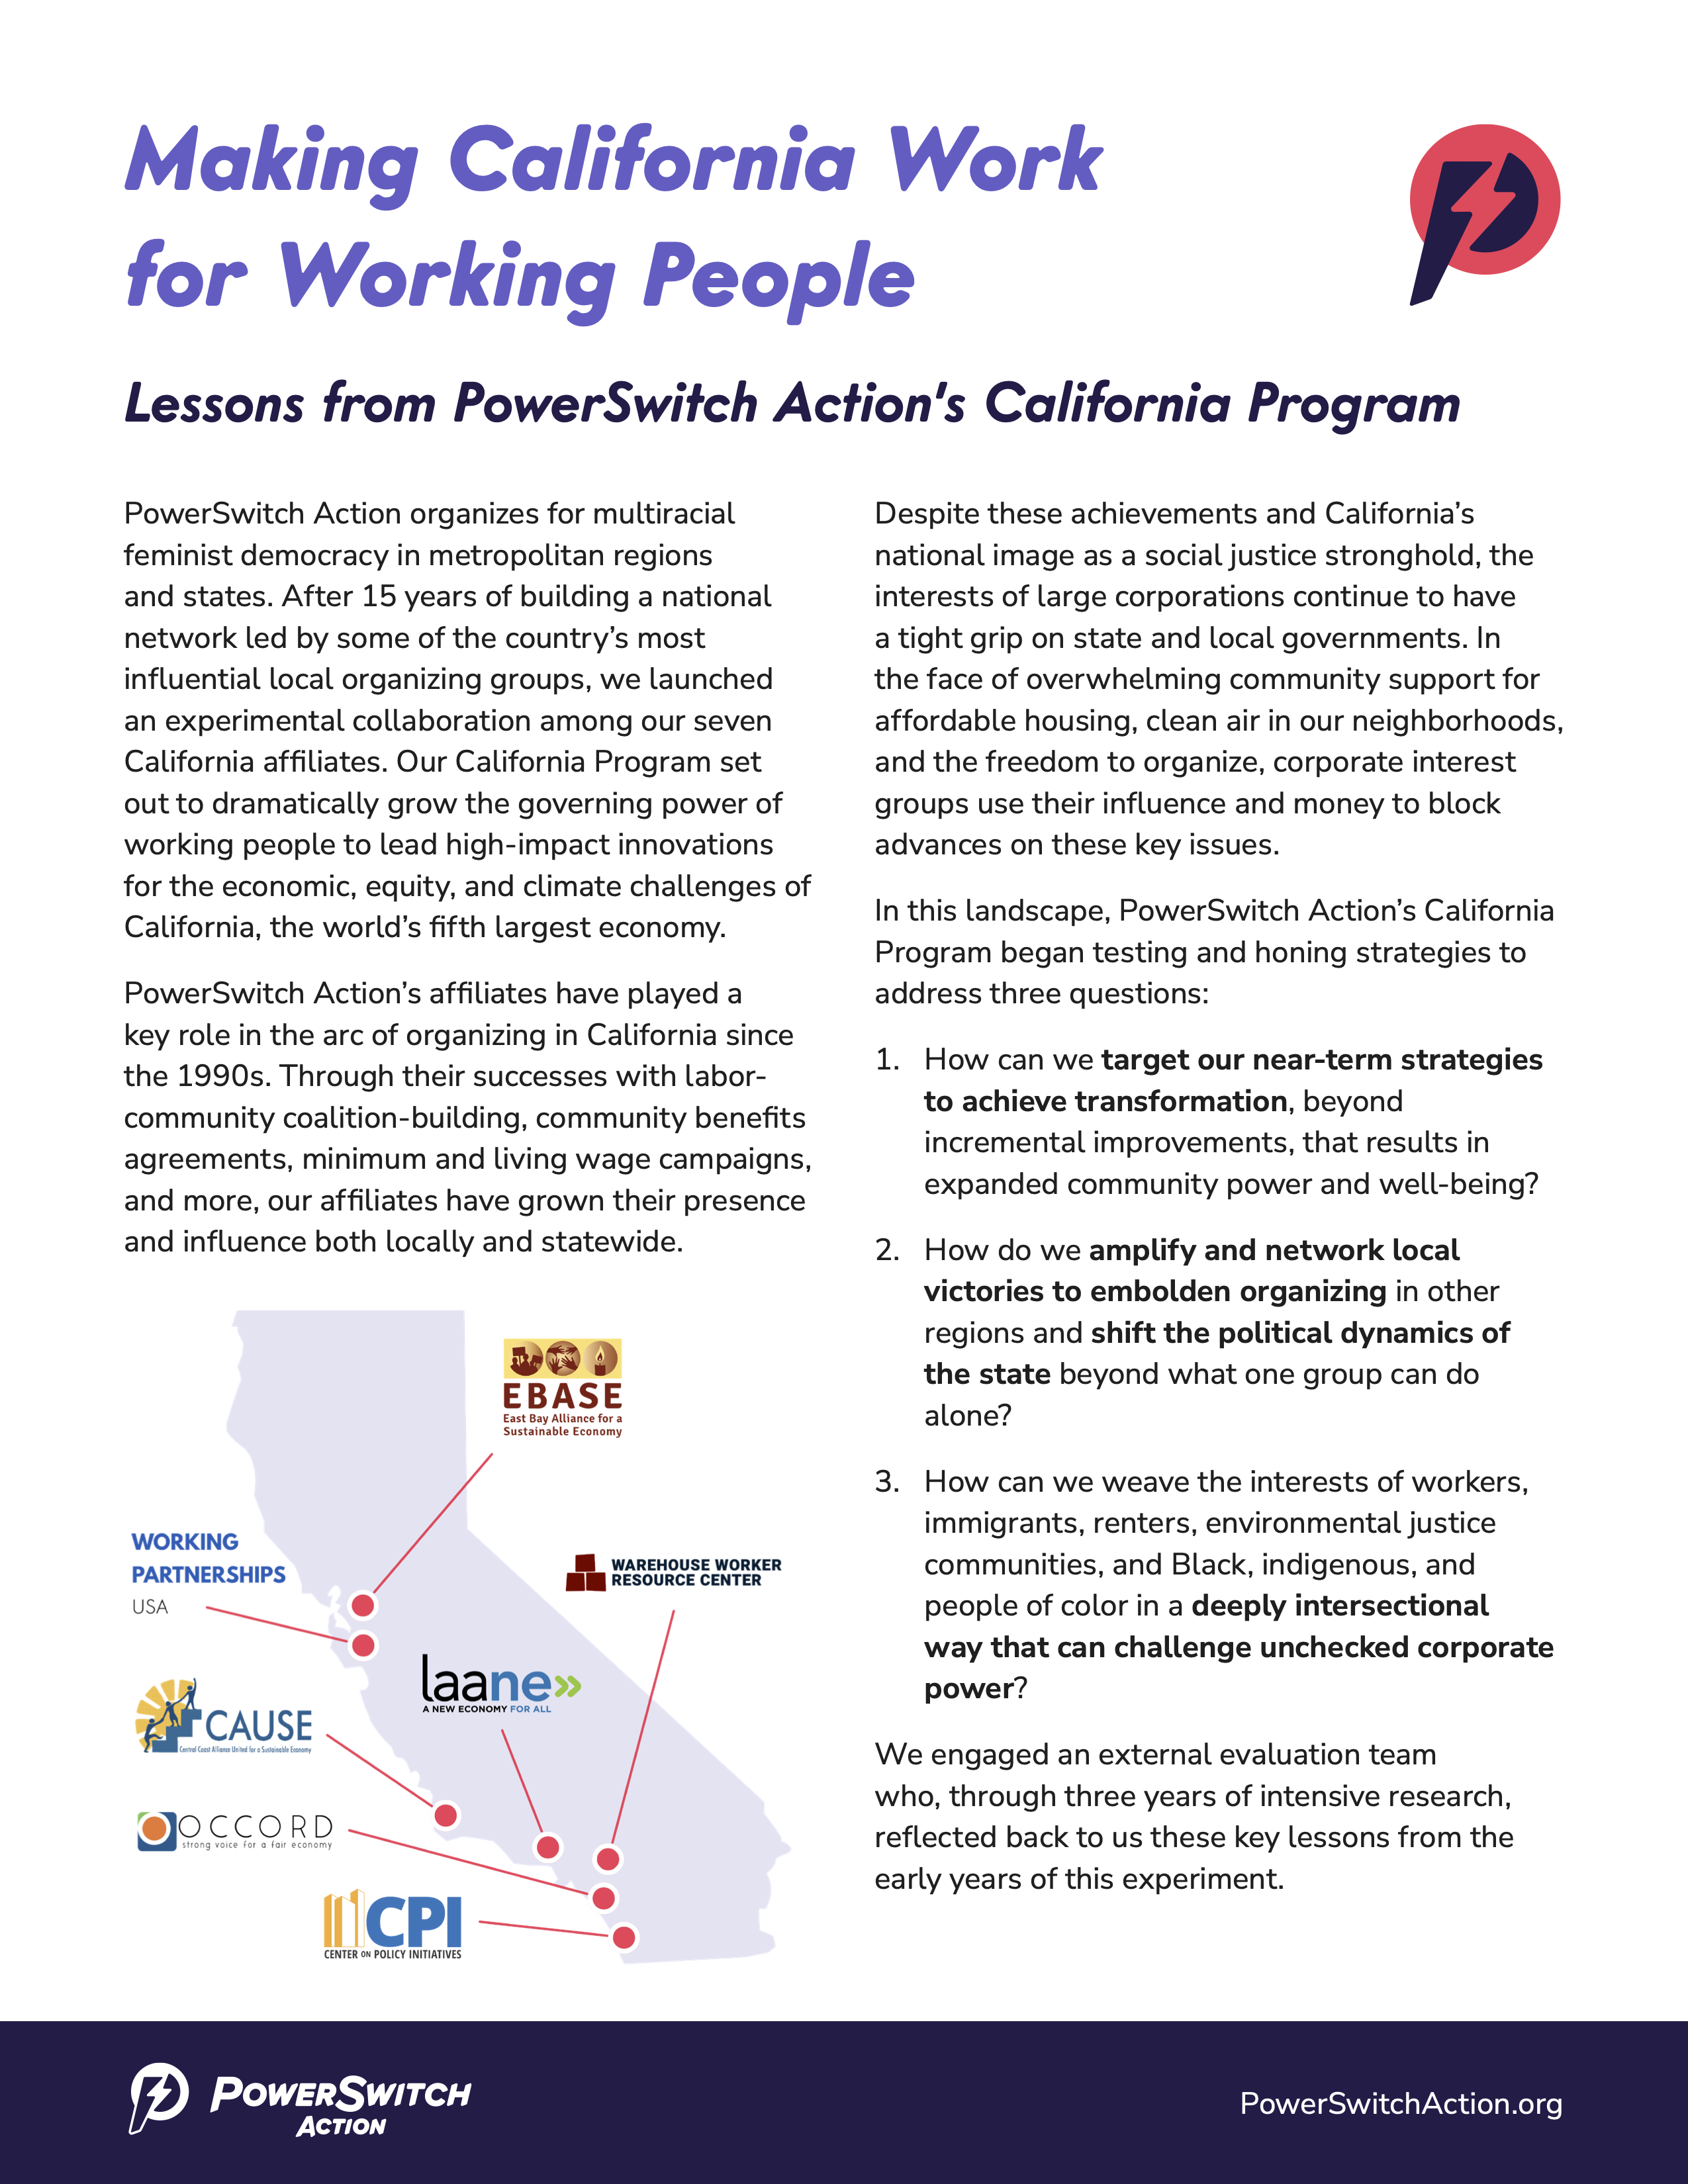 "Making California Work for Working People" executive summary cover